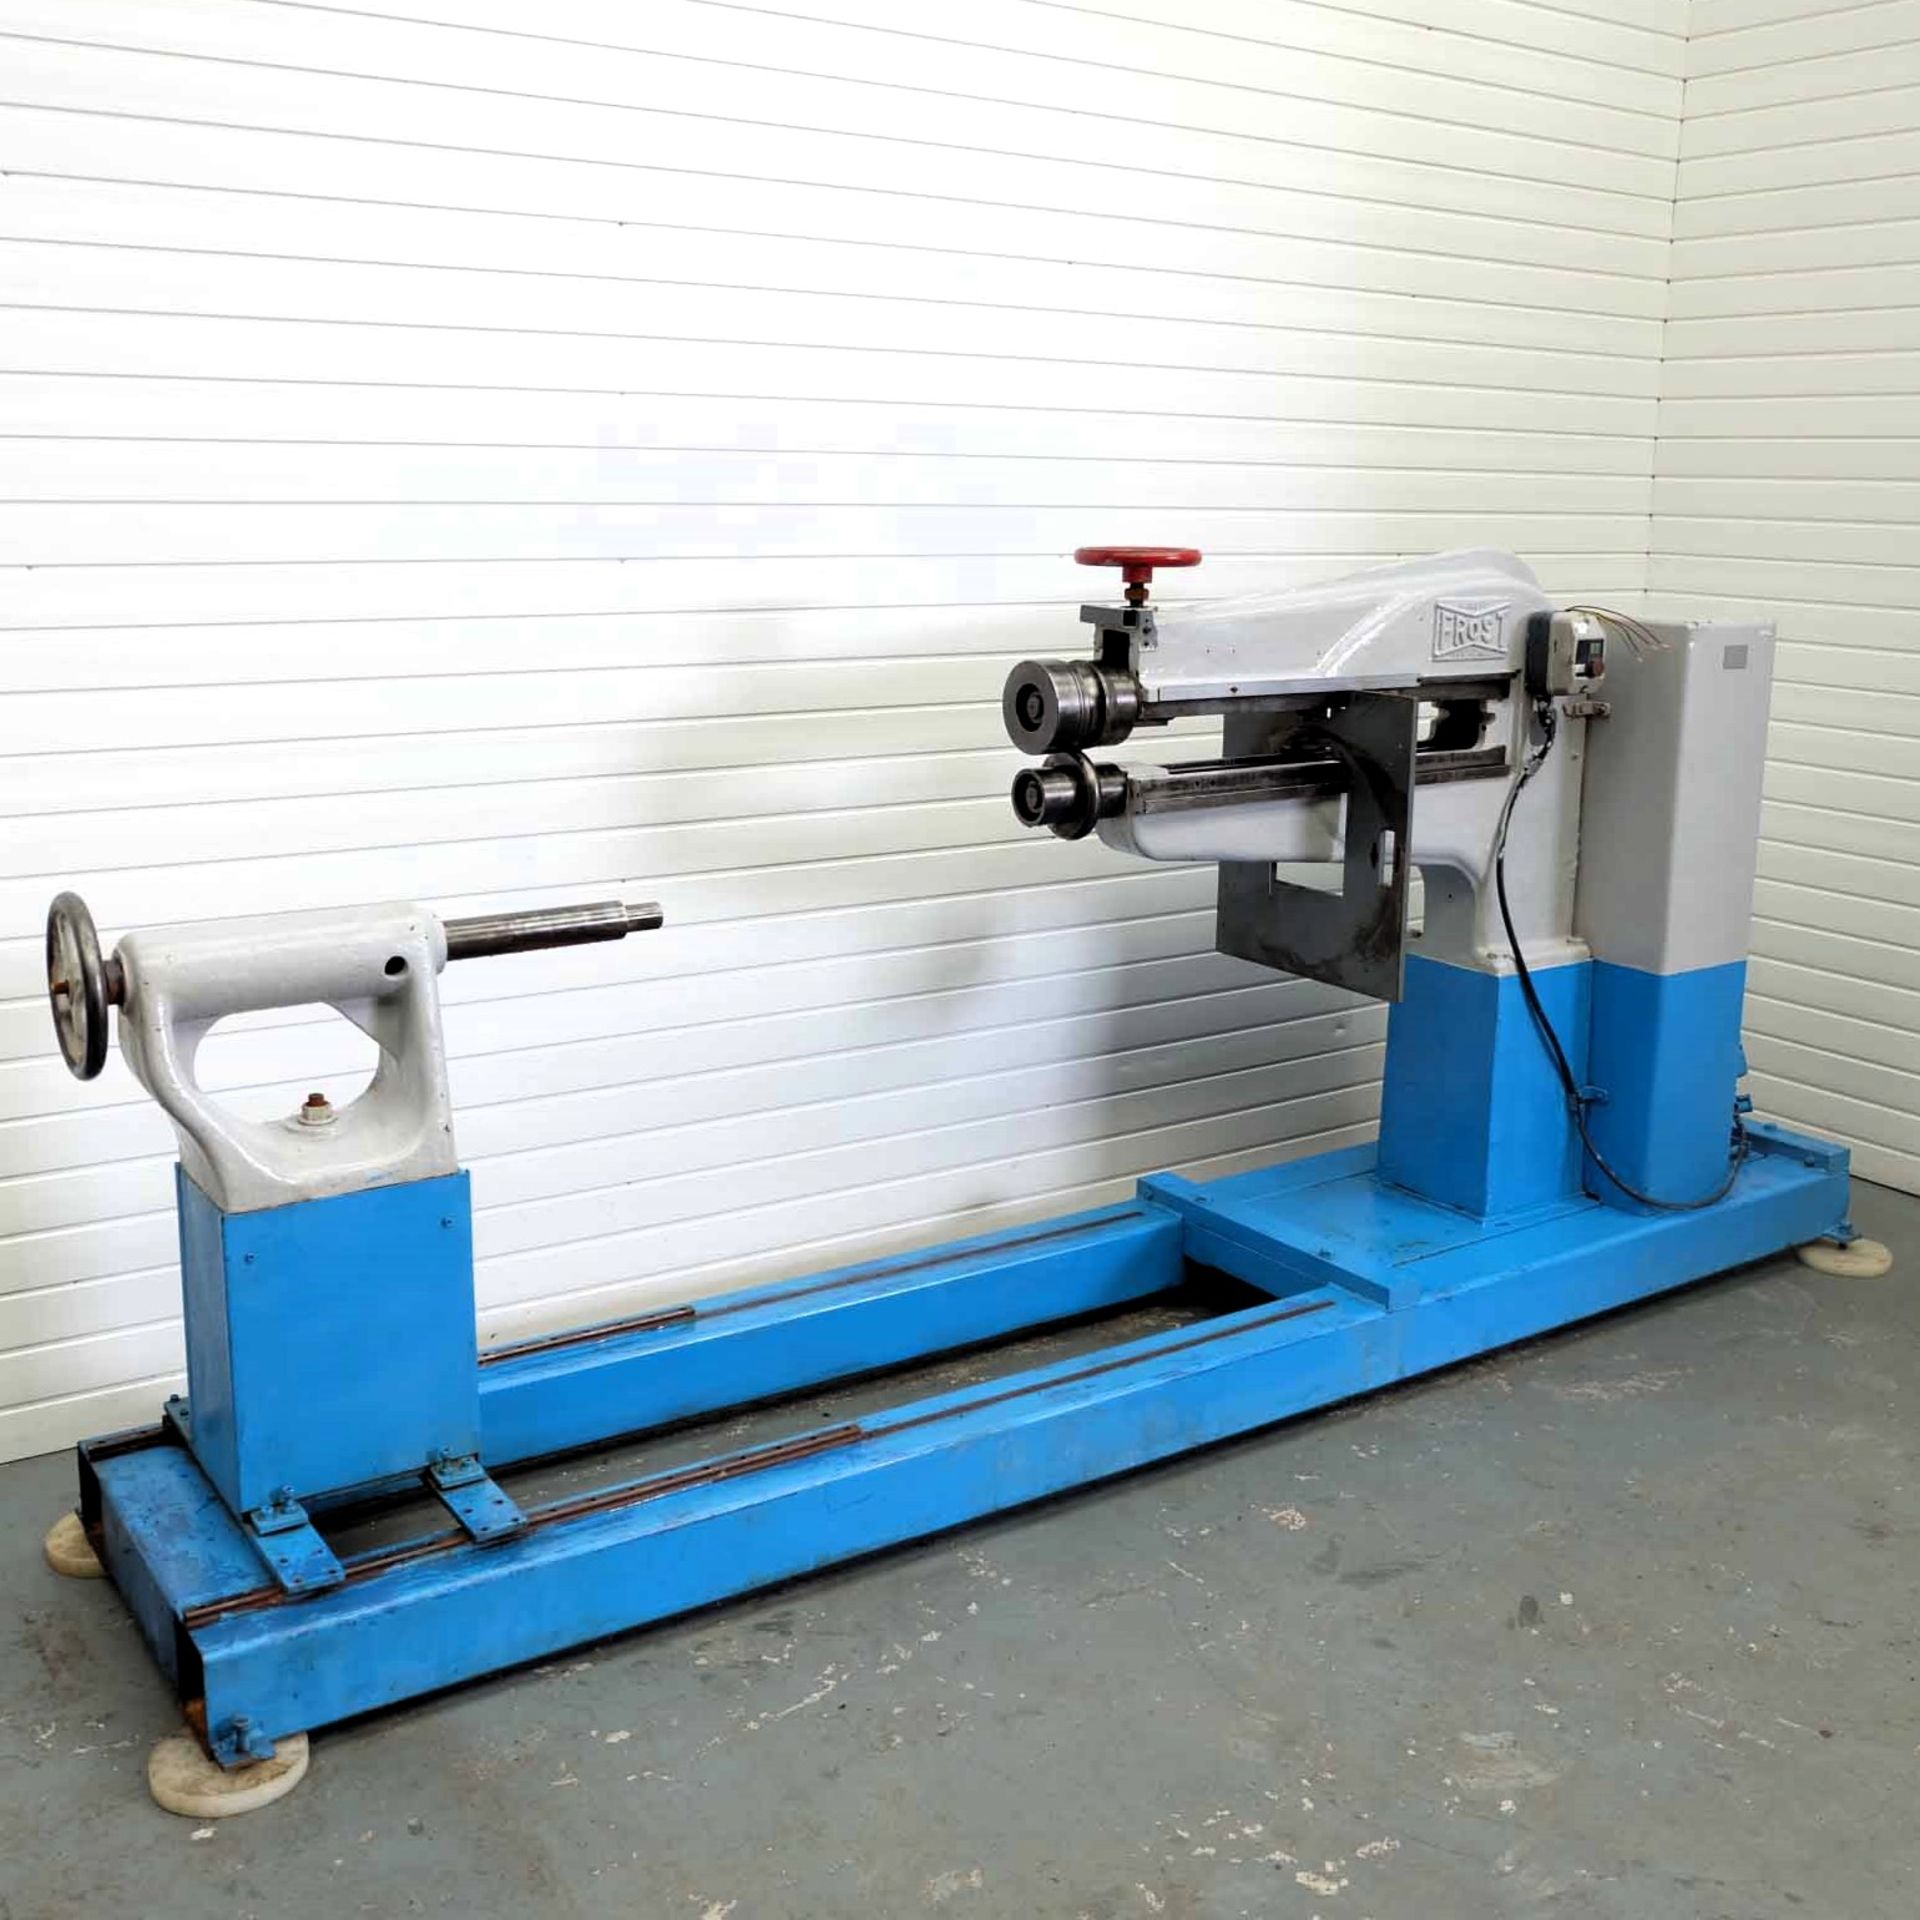 Frost Swaging Machine. Throat Depth 36" Approx. With Tailstock. Motor 3 Phase, 1 HP. - Image 2 of 10